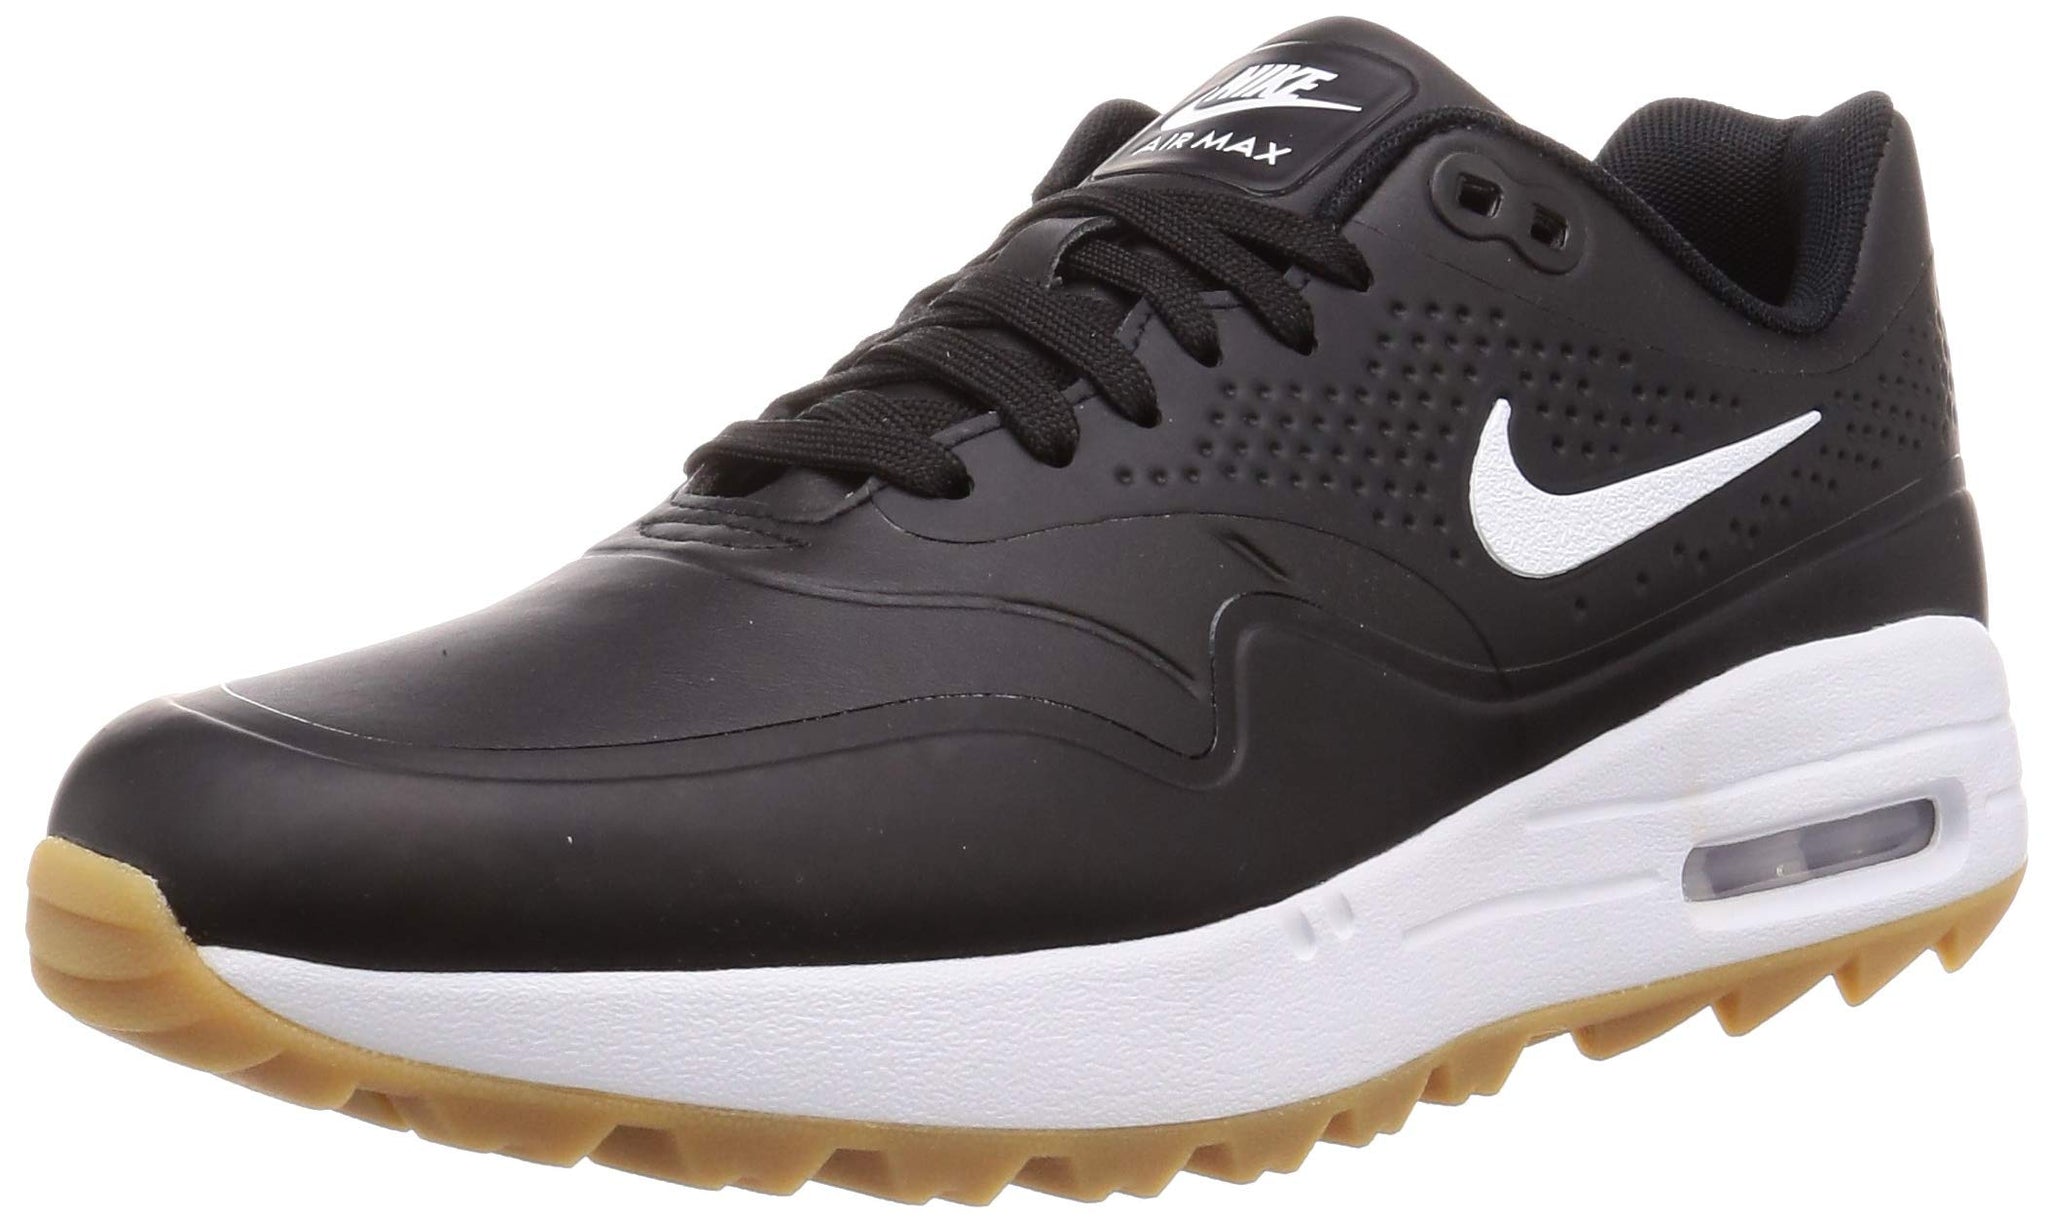 nike air max spikeless golf shoes